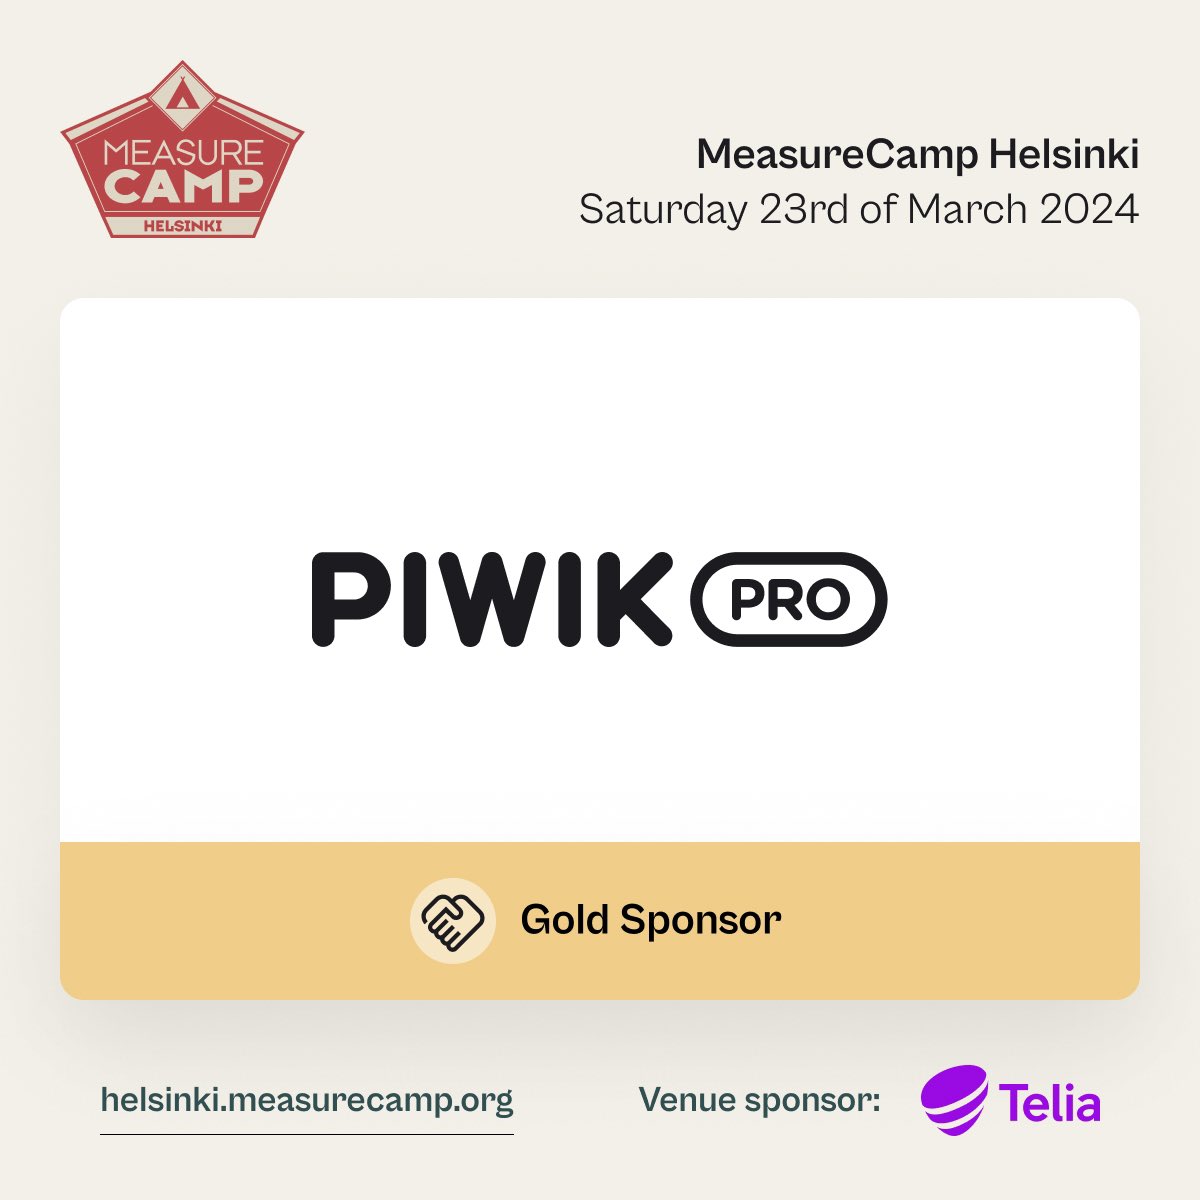 We are excited to present our 🥇Gold sponsor - @PiwikPro 
Piwik PRO Analytics Suite provides flexible data collection and reports in addition to consent management, tag management and a customer data platform. piwik.pro

Say hi to Piwik Pro crew in Helsinki 💫